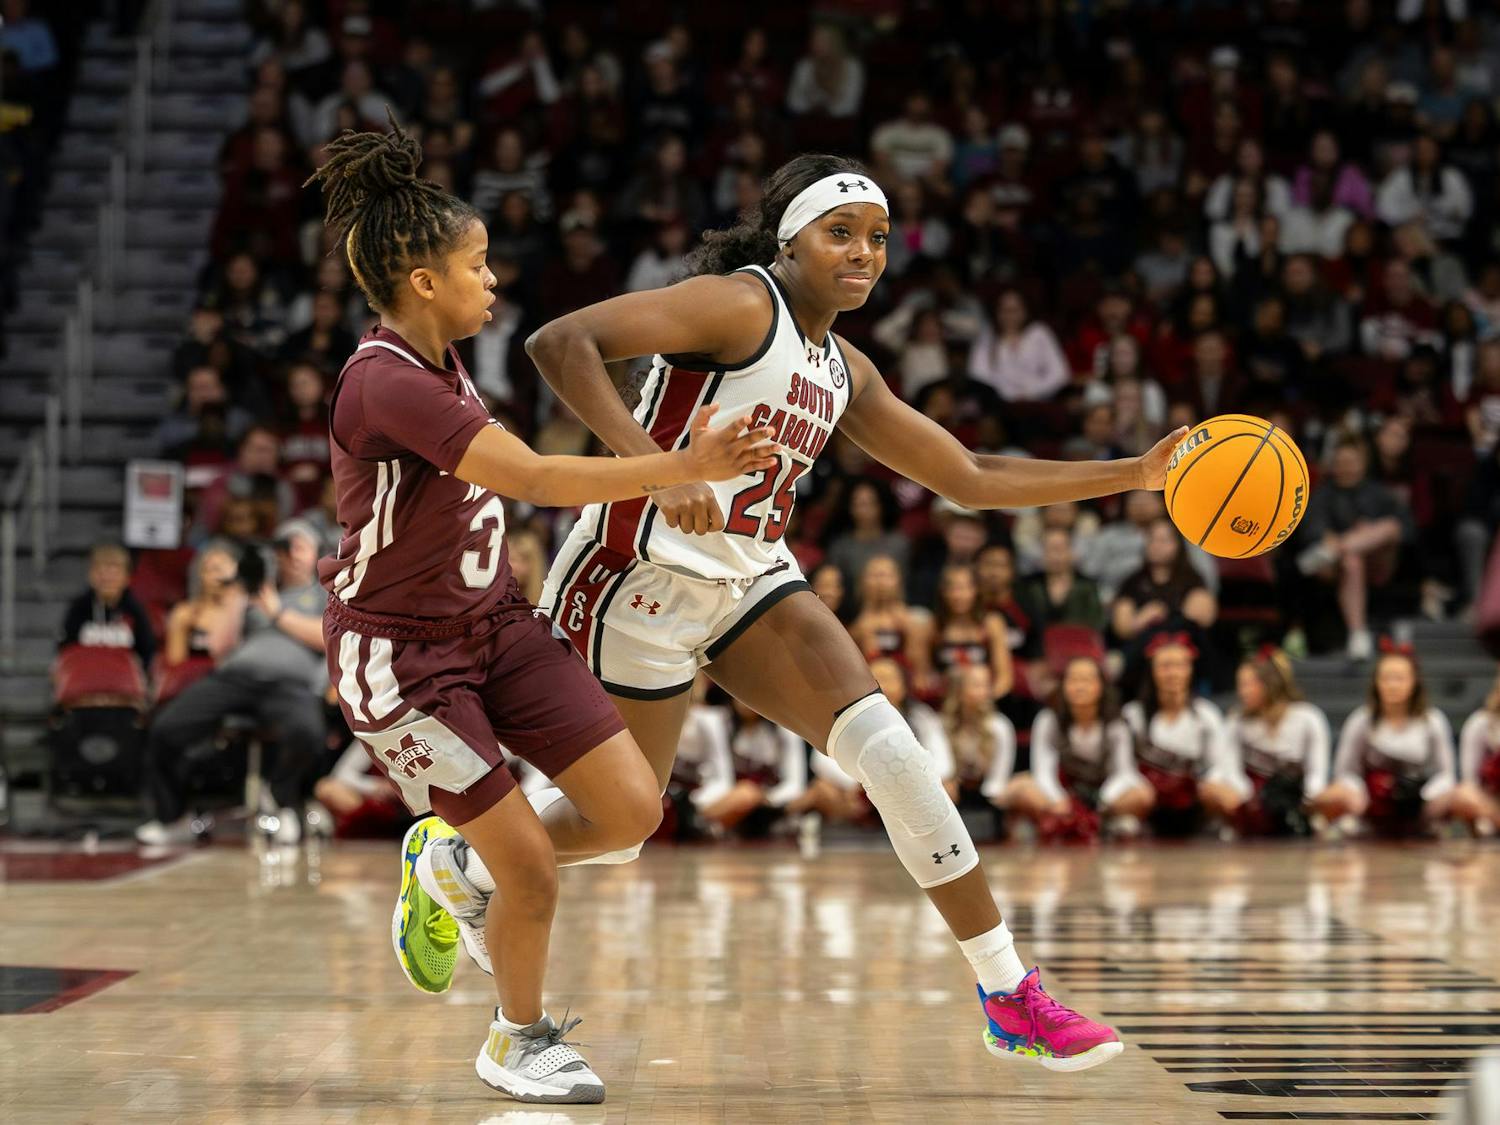 Sophomore guard Raven Johnson advances the ball up the court during South Carolina's game against Mississippi State at Colonial Life Arena on Jan. 7, 2024. Johnson scored 7 points across her 27 minutes of playing time in the Gamecocks' 85-66 victory against the Bulldogs.